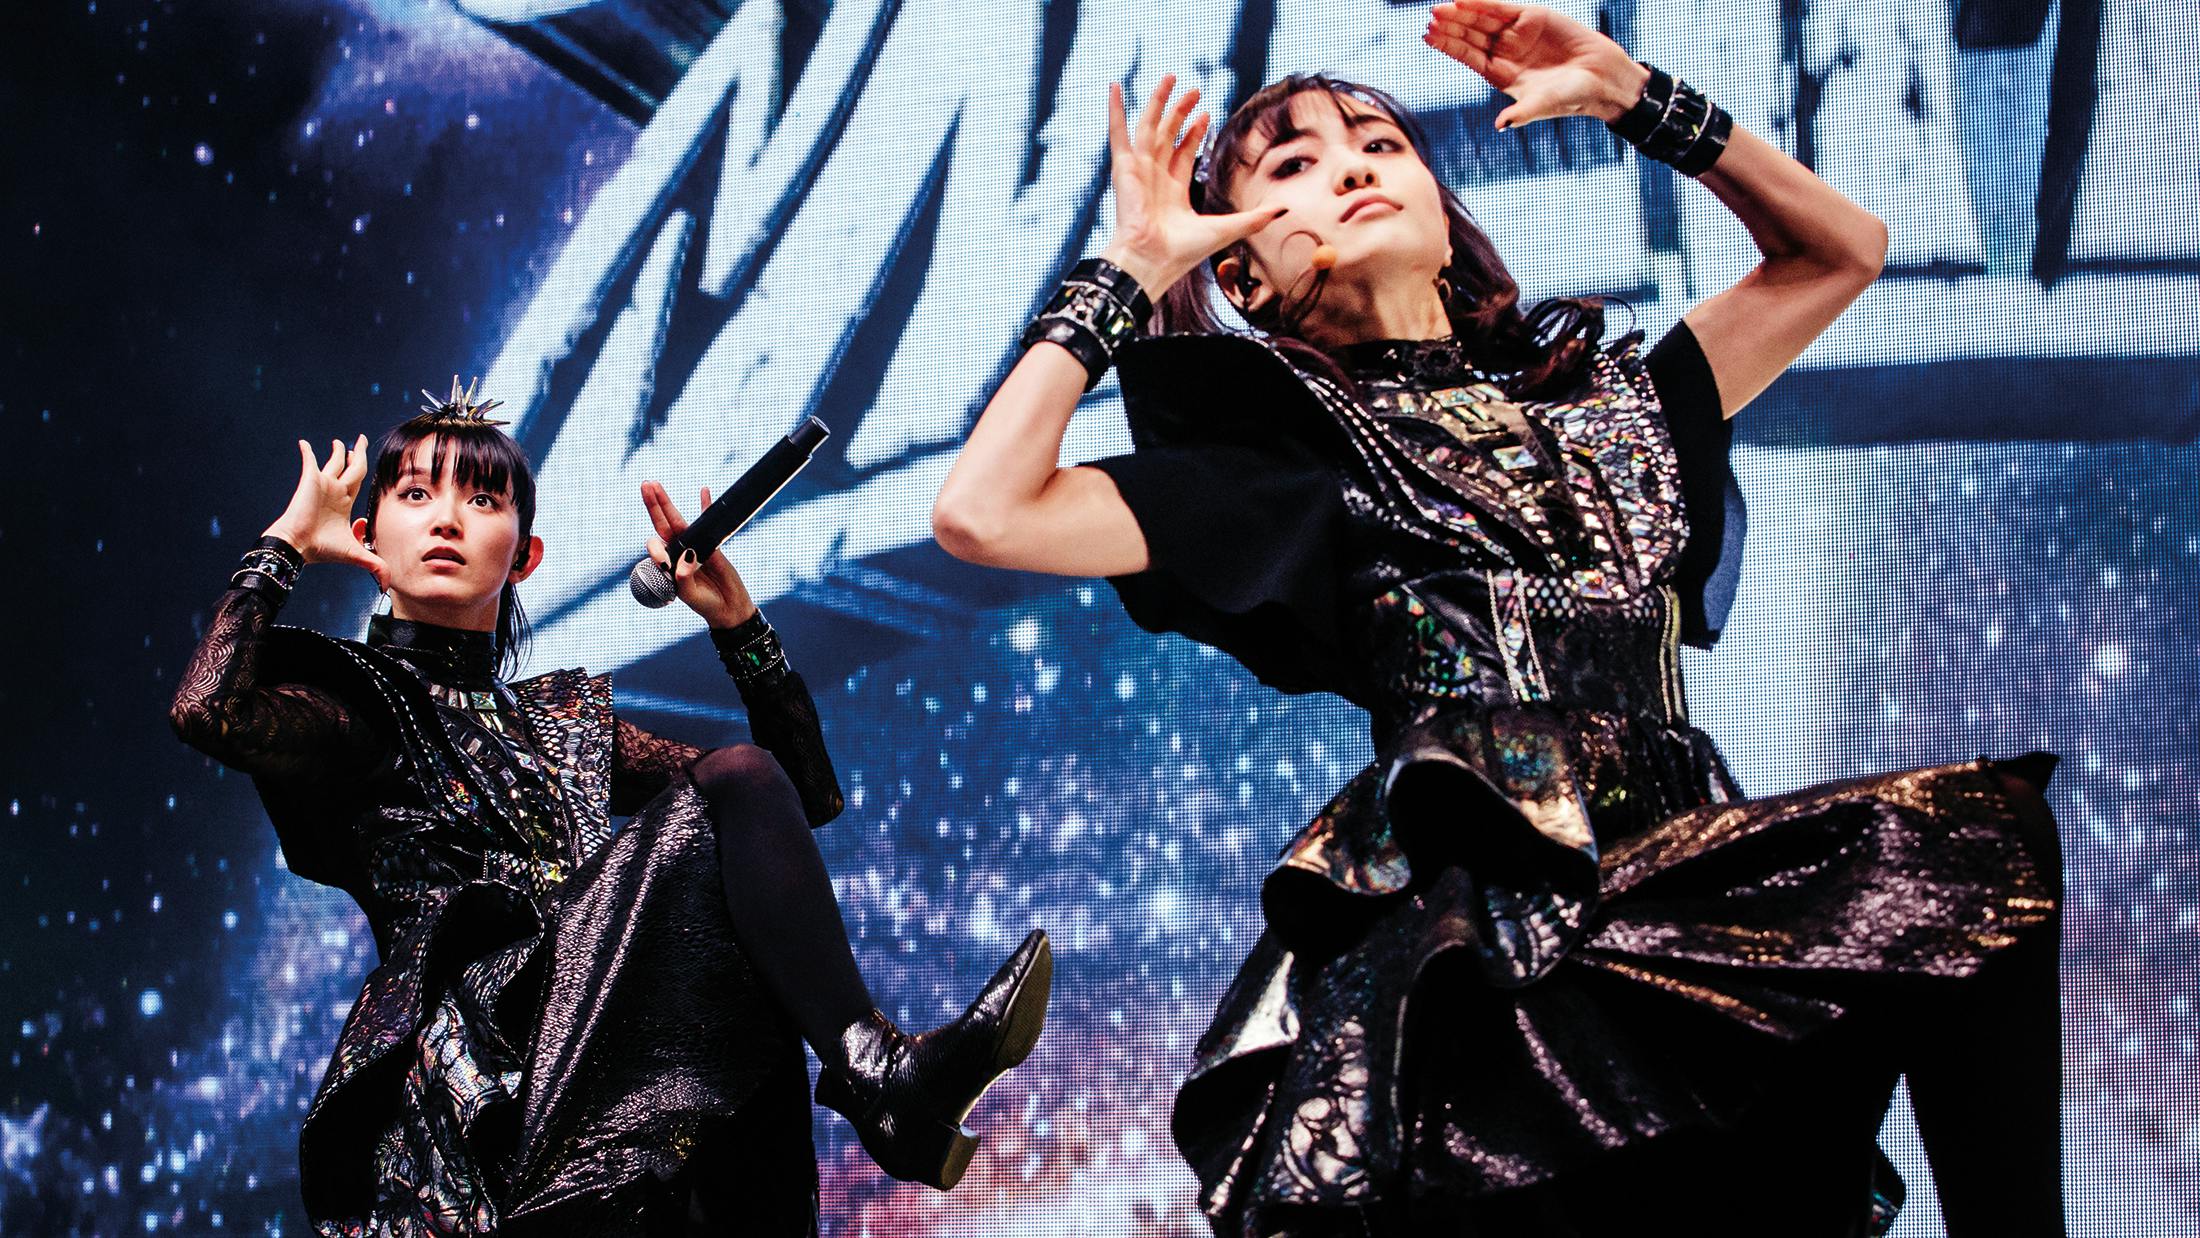 Here’s how you can listen to BABYMETAL’s new album THE OTHER ONE early